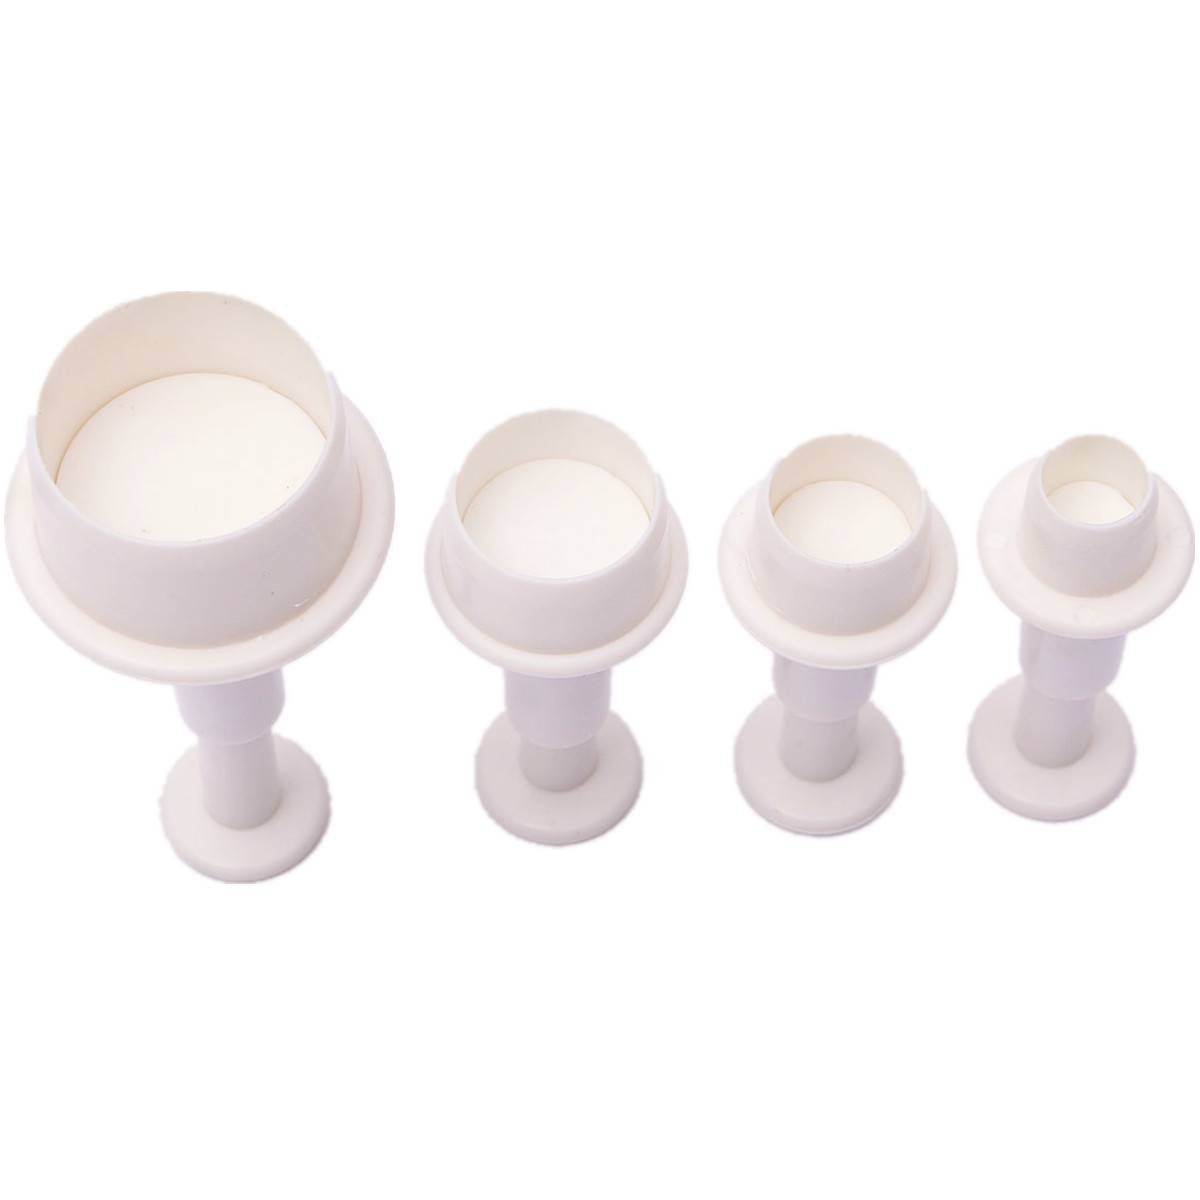 SPHTOEO A Set of 4pcs Round Circle Cake Biscuit Cookies Mold Cutter Plunger Fondant Sugarcraft Icing Decorating